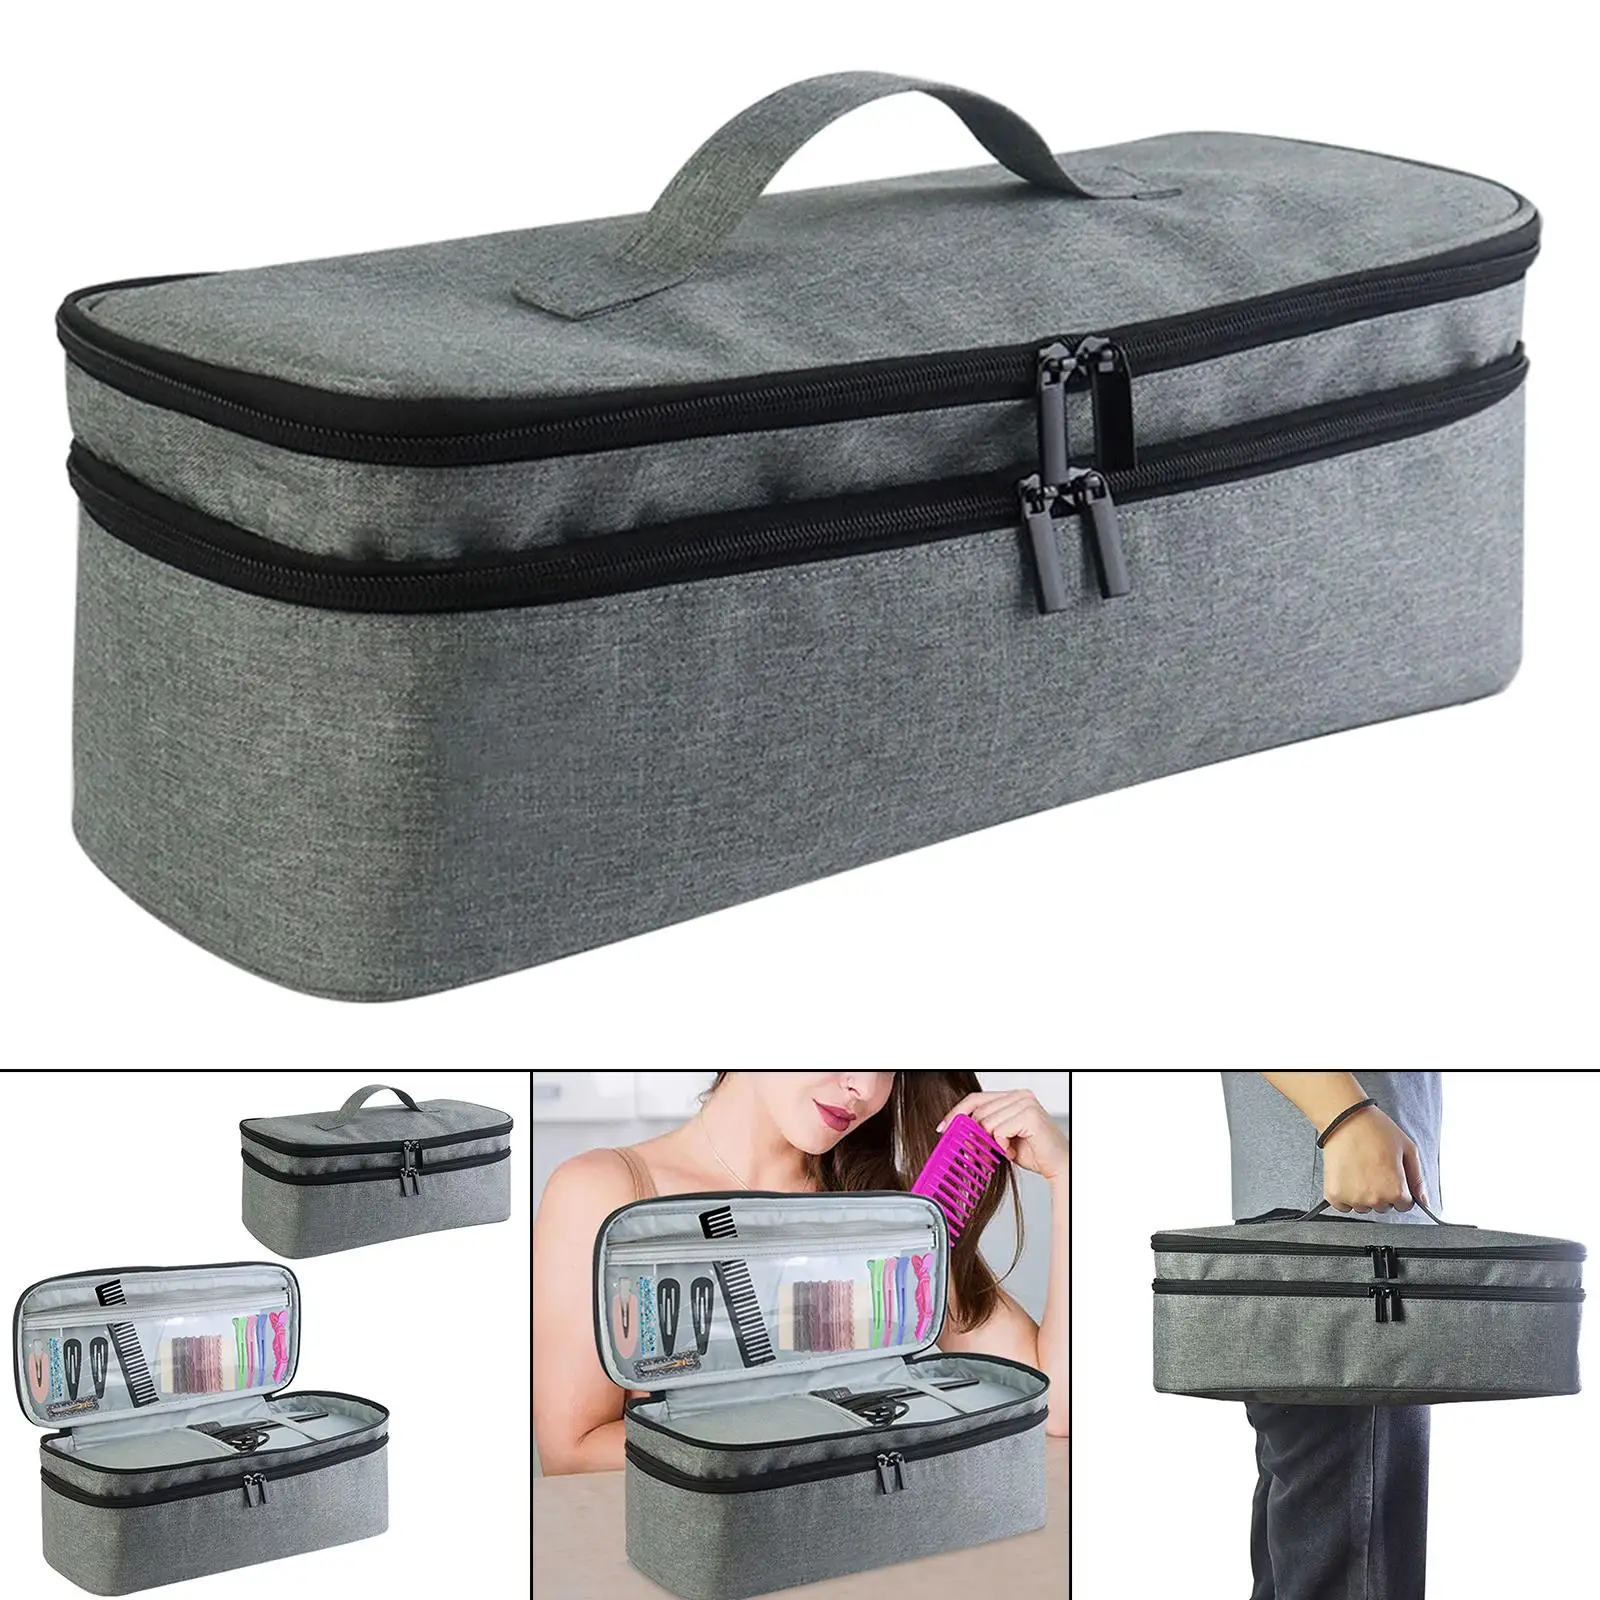 Double Layer Hair Dryer Bags Toiletry Bag Travel Case Bag Organizer Bag Dustproof Protection Bag for Home